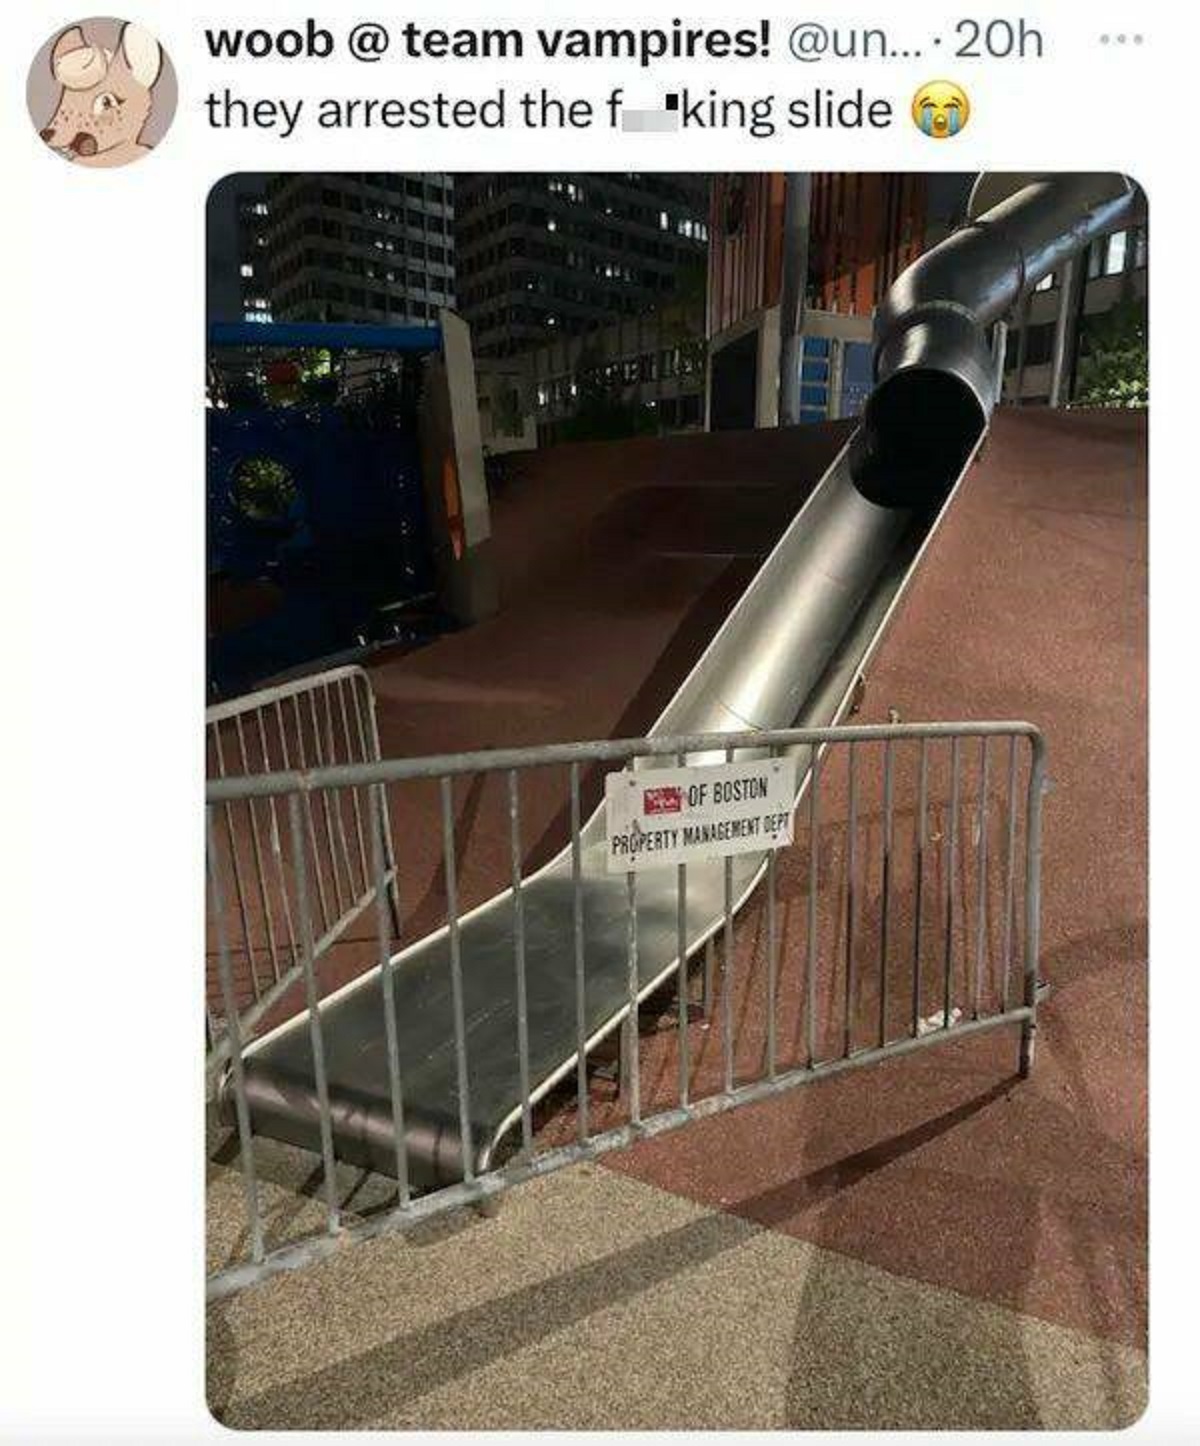 funny tweets - handrail - woob vampires! ... 20h they arrested the f king slide Of Boston Property Management Dept 608